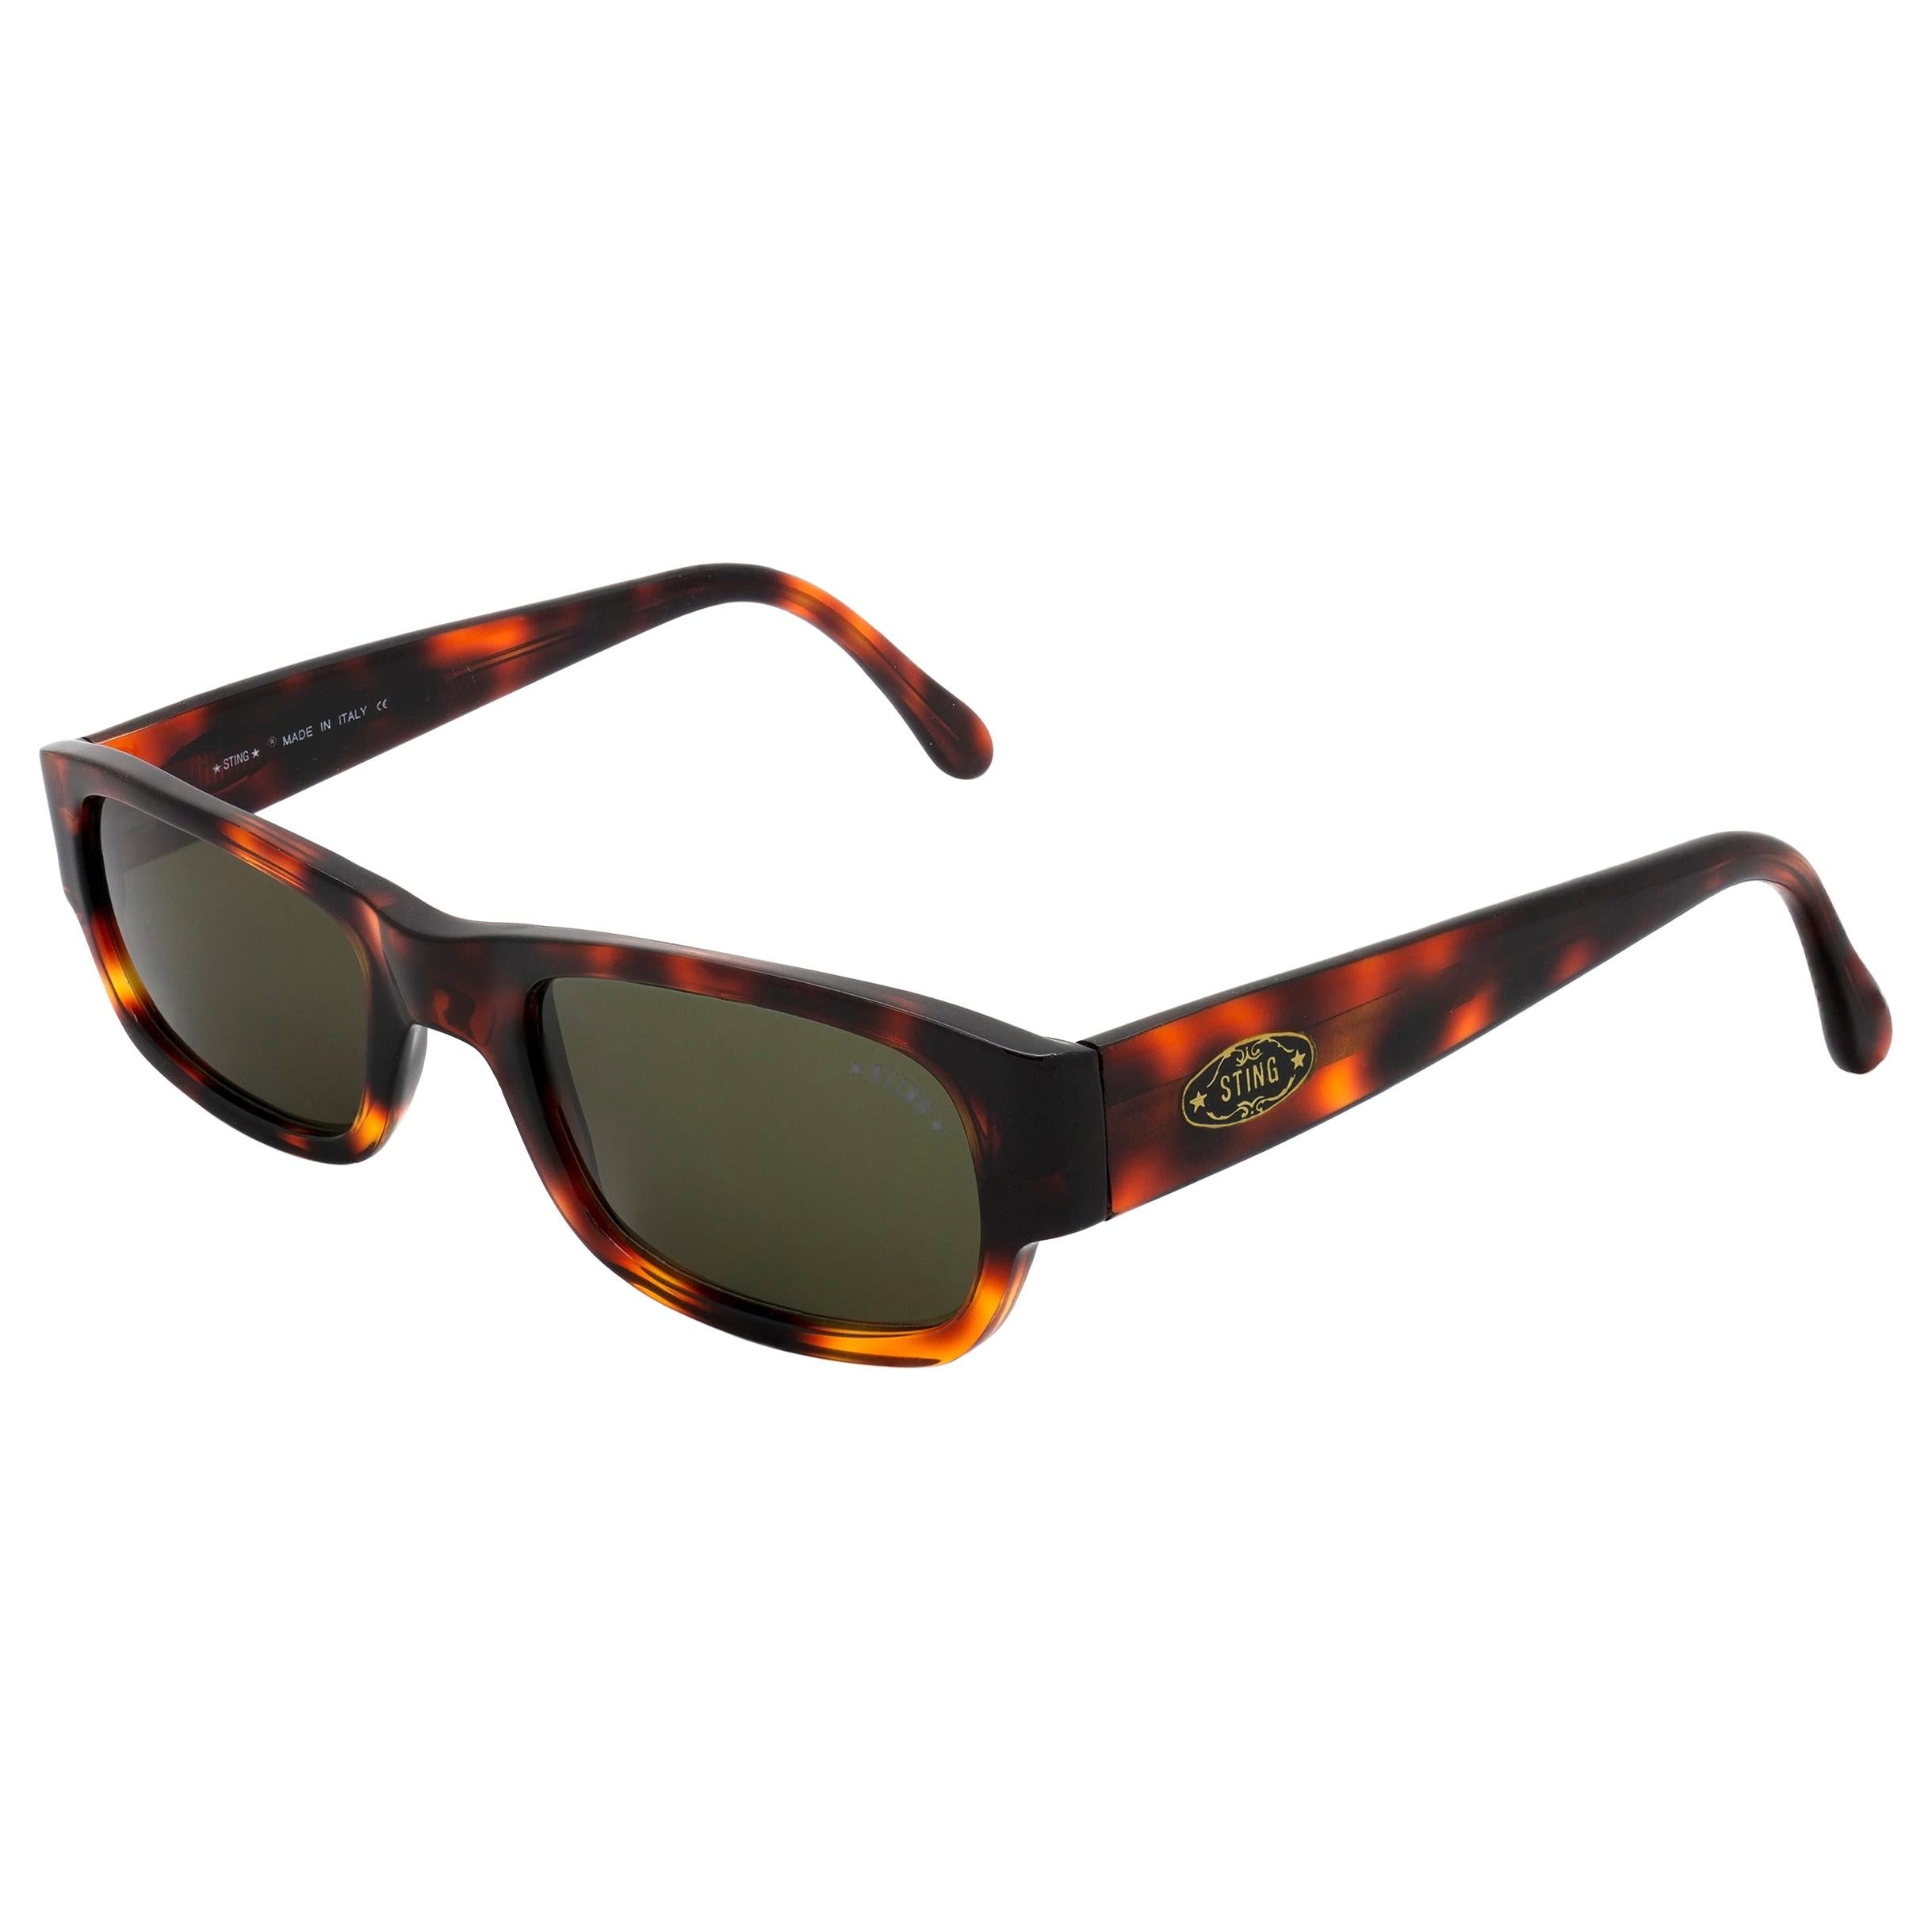 Sting narrow tortoise sunglasses, made in Italy